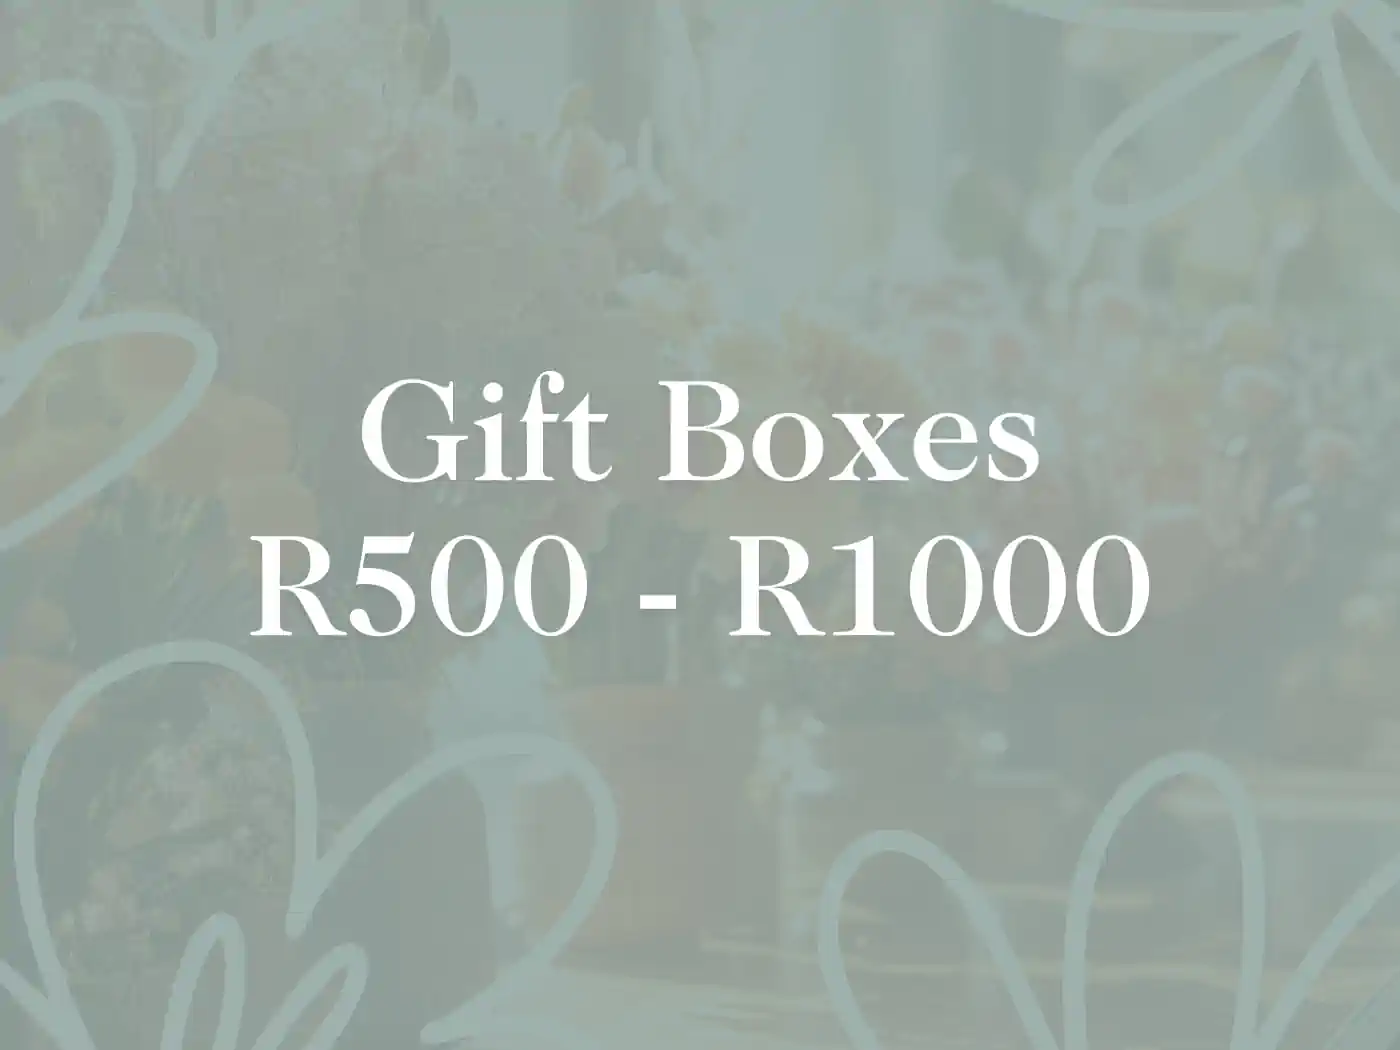 A serene background with the text "Gift Boxes R500 - R1000" displayed in white font, emphasizing the range of gift boxes available. Fabulous Flowers and Gifts, Gift Boxes R500-R1000.